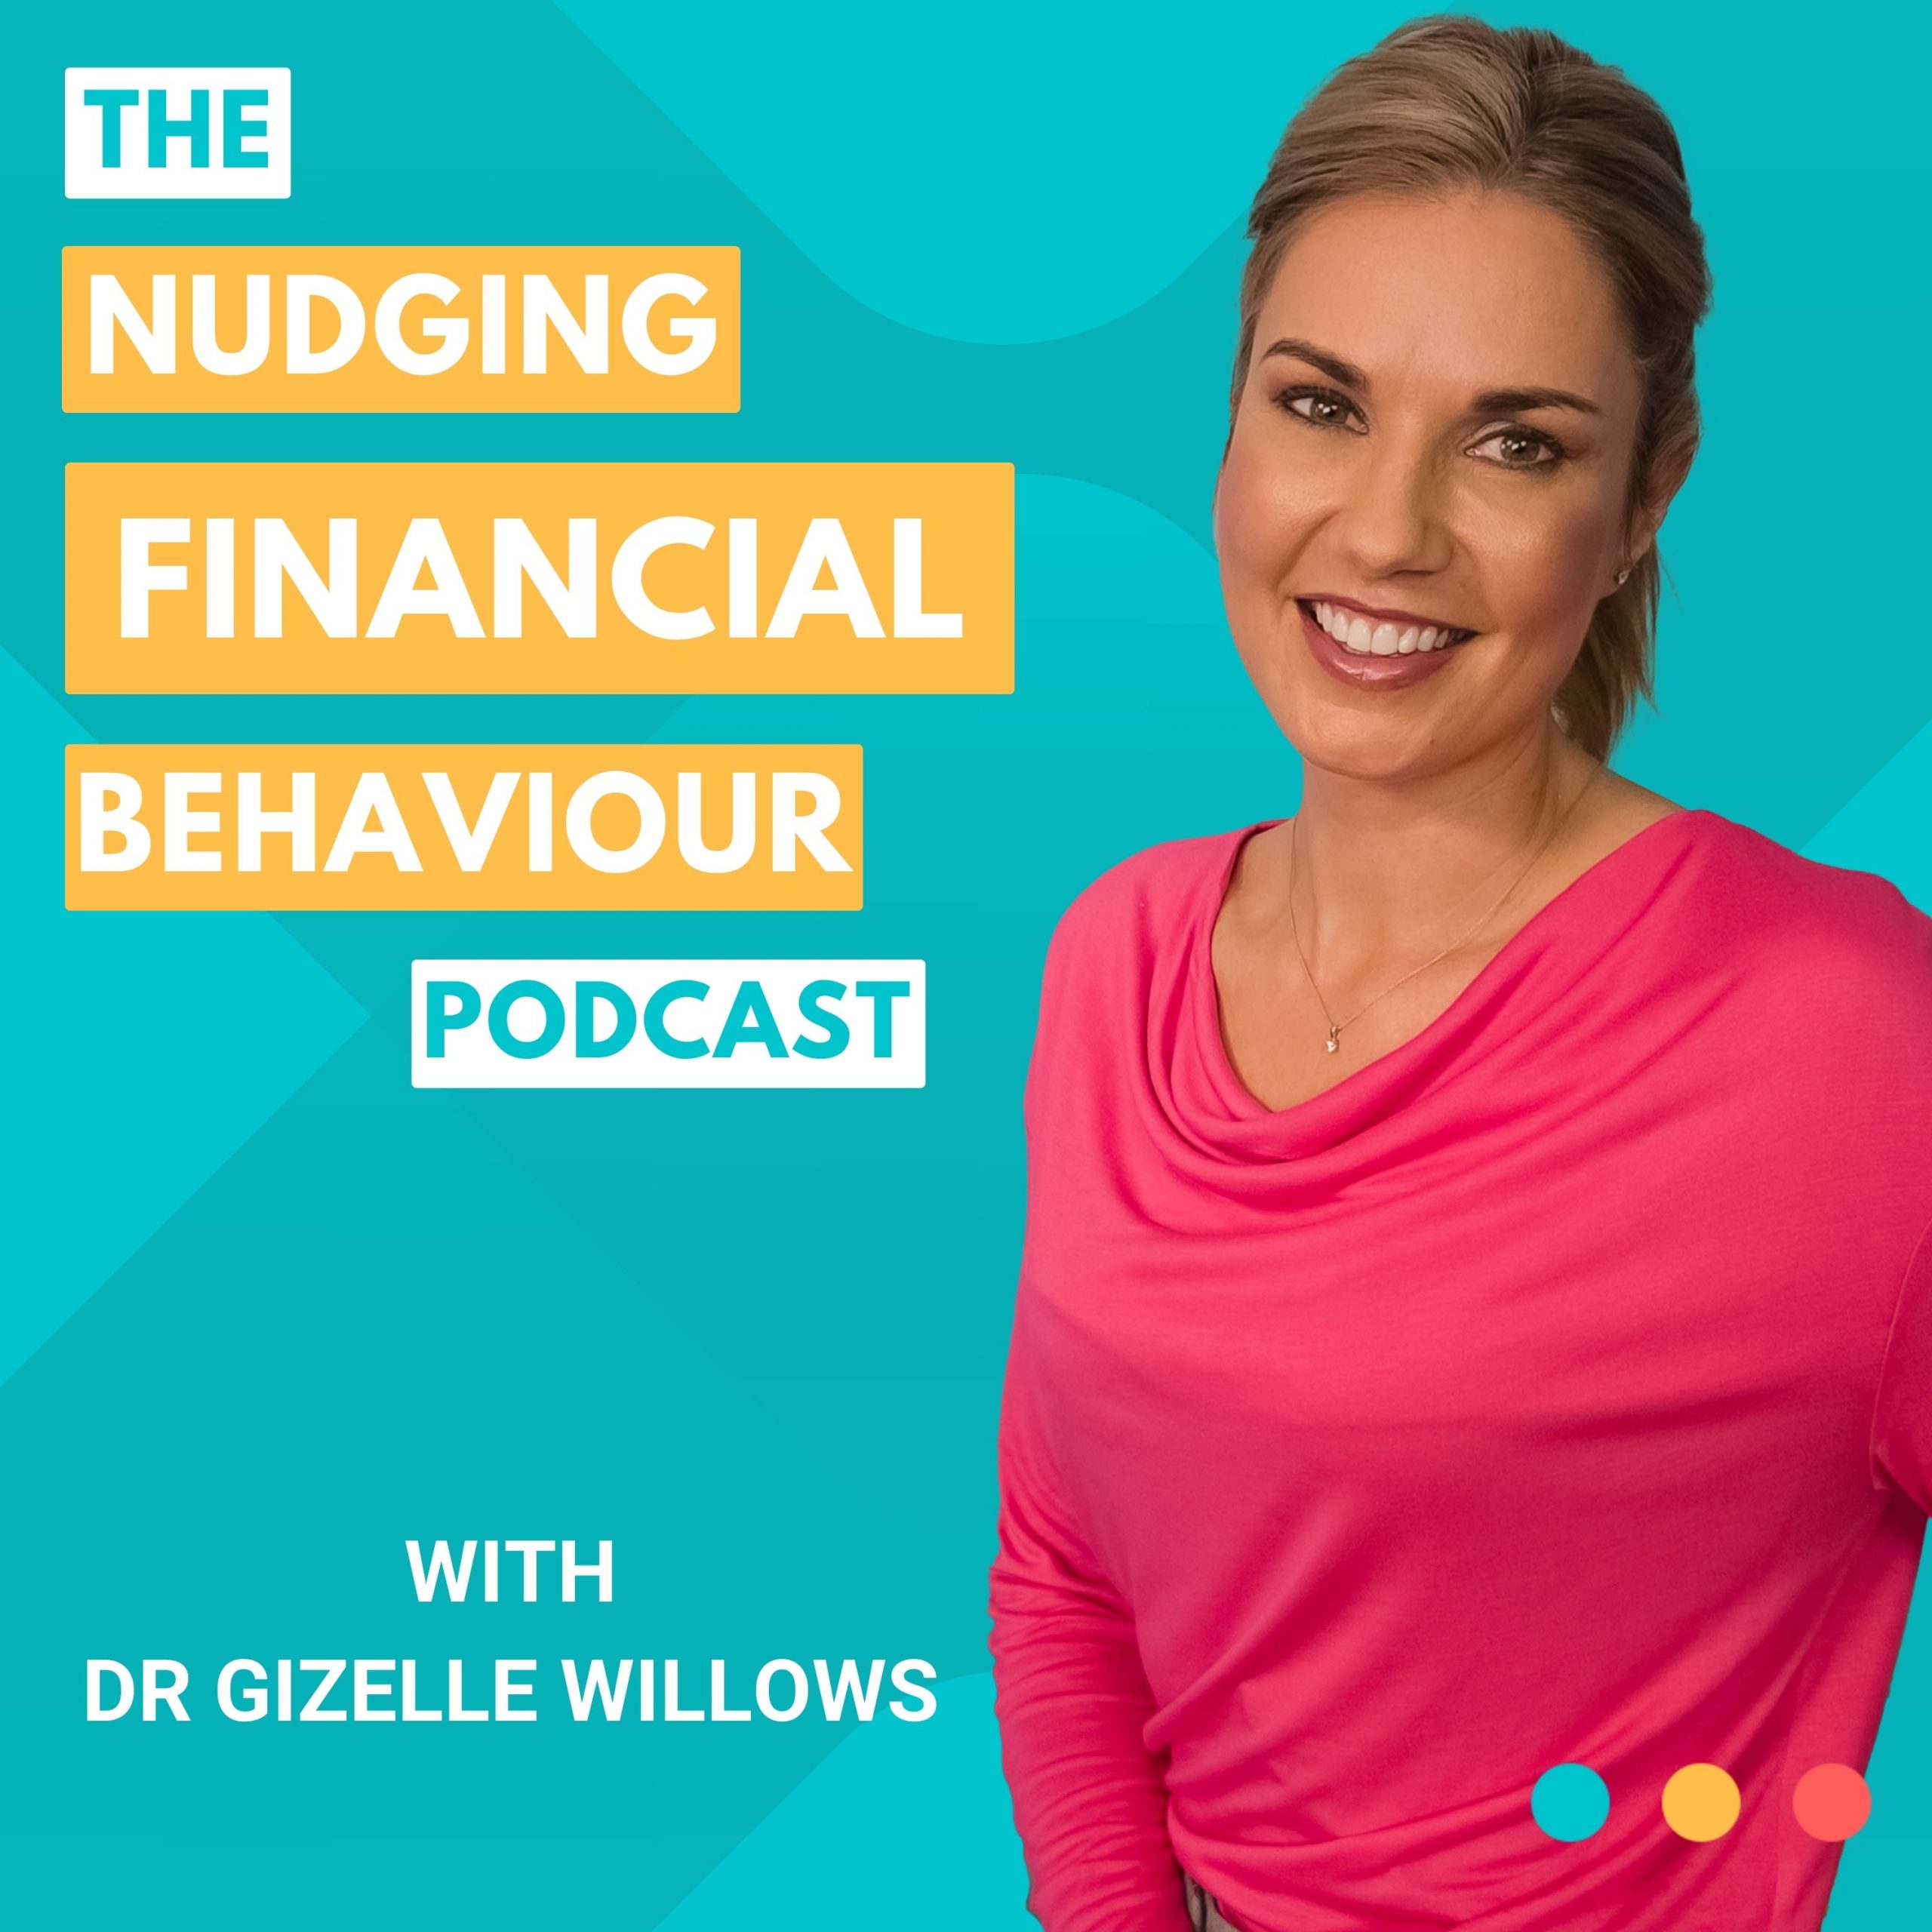 Season 2 of The Nudging Financial Behaviour podcast